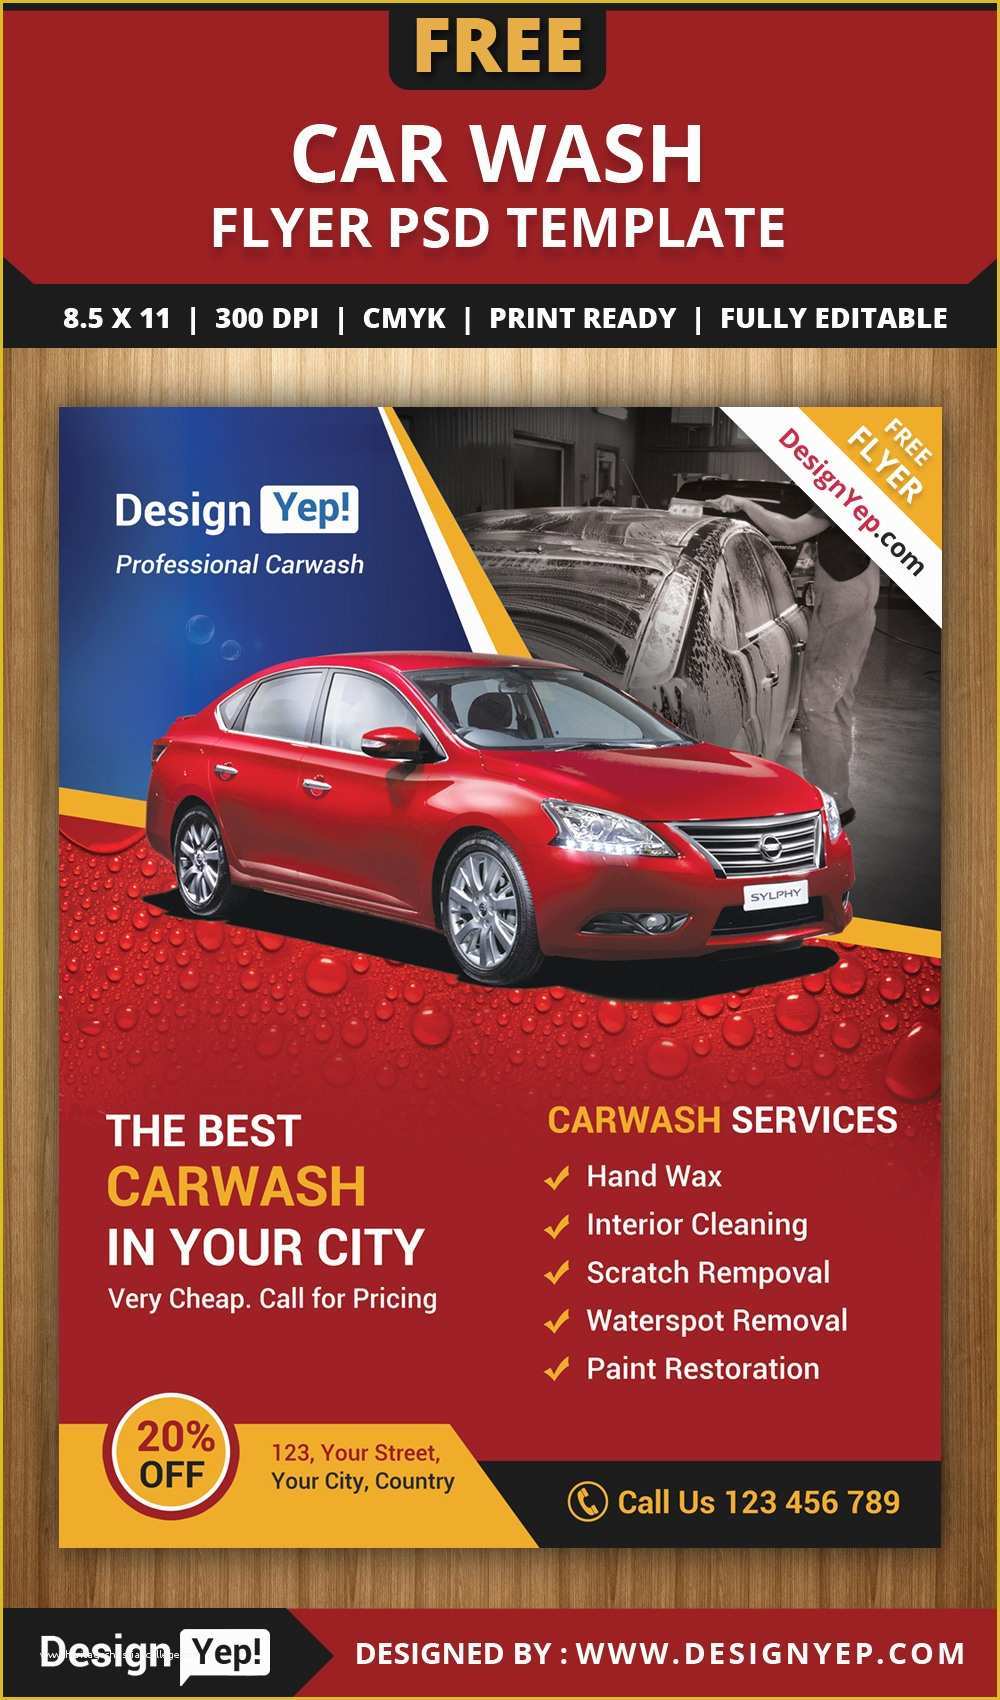 Car Wash Flyer Template Free Of Free Car Wash Flyer Psd Template On Behance